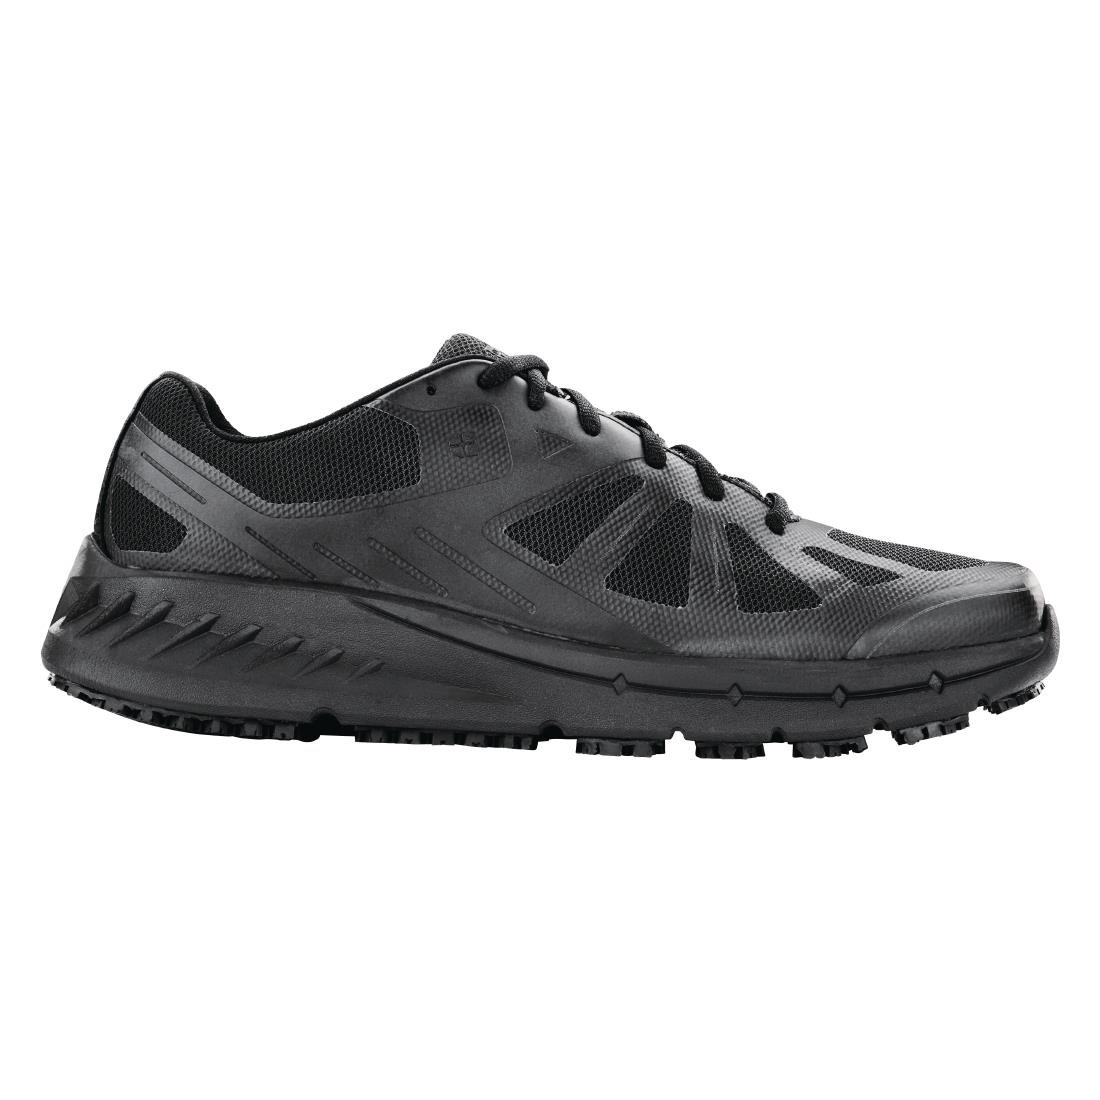 BB599-43 Shoes for Crews Endurance Trainers Black Size 43